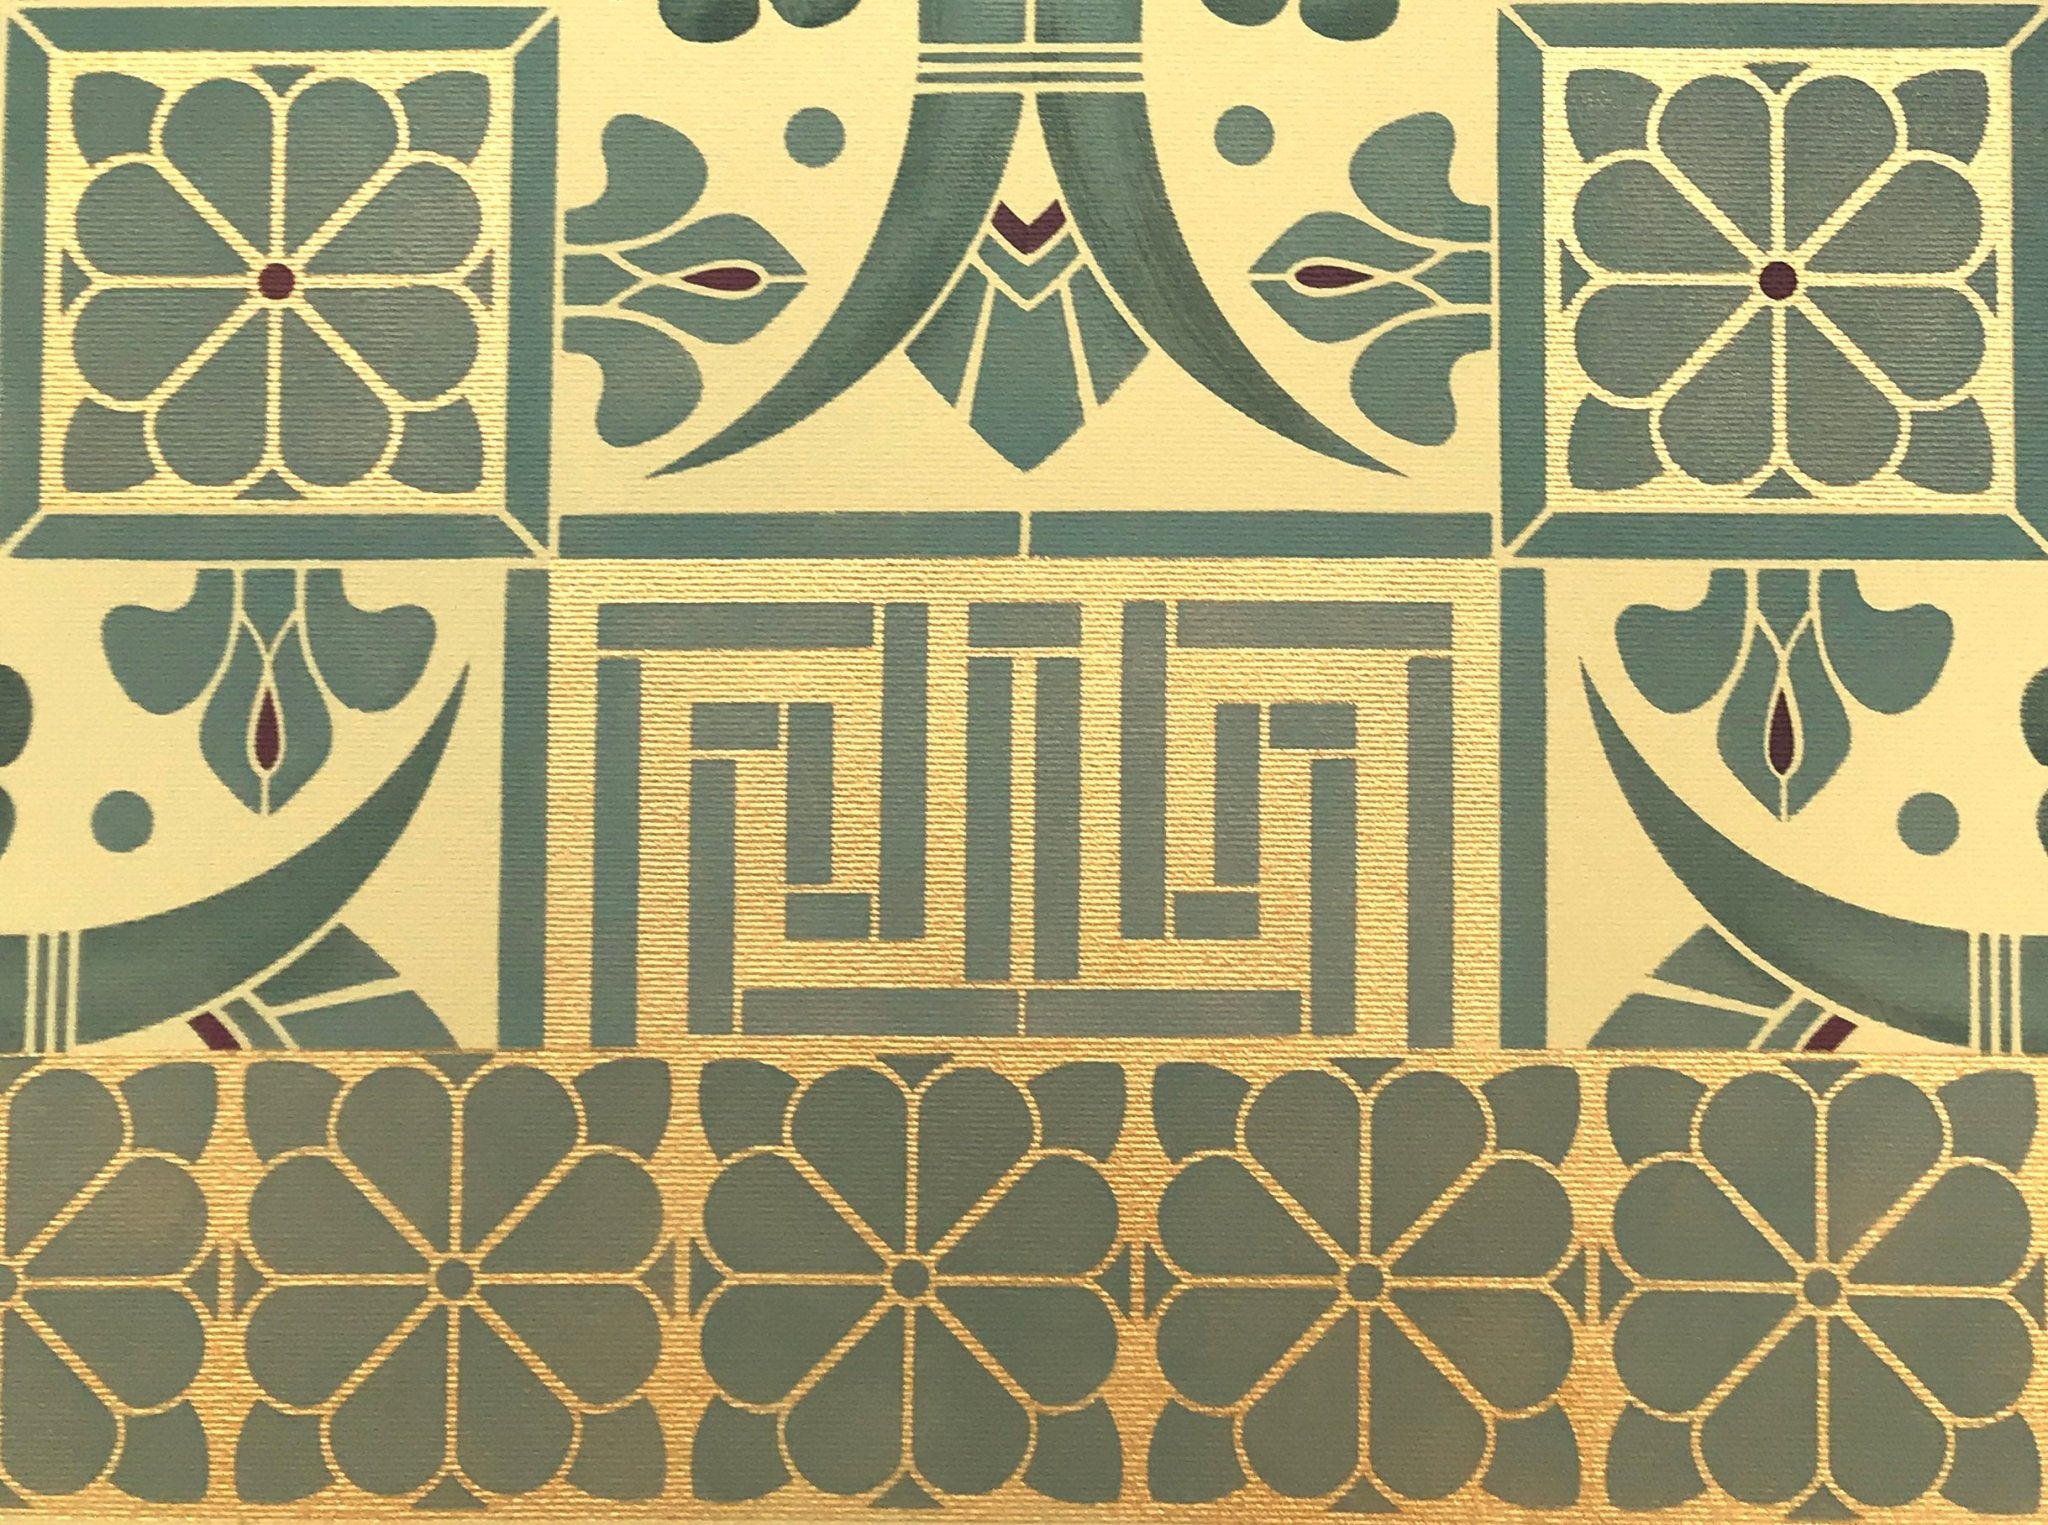 A close up image of the interior pattern meeting the floral border of Greek Key Floorcloth #4.